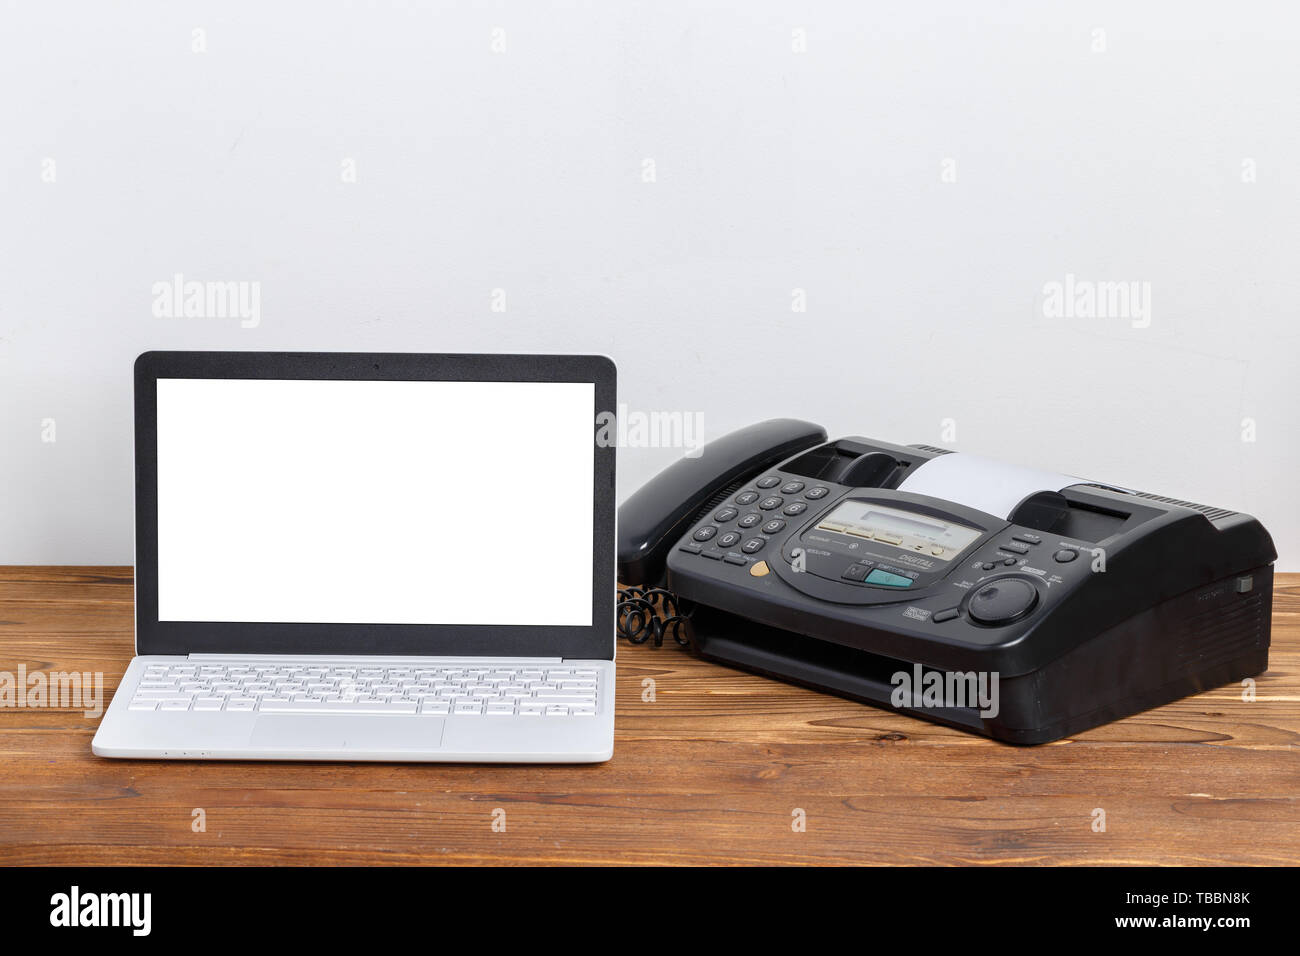 old fax machine on the table Stock Photo